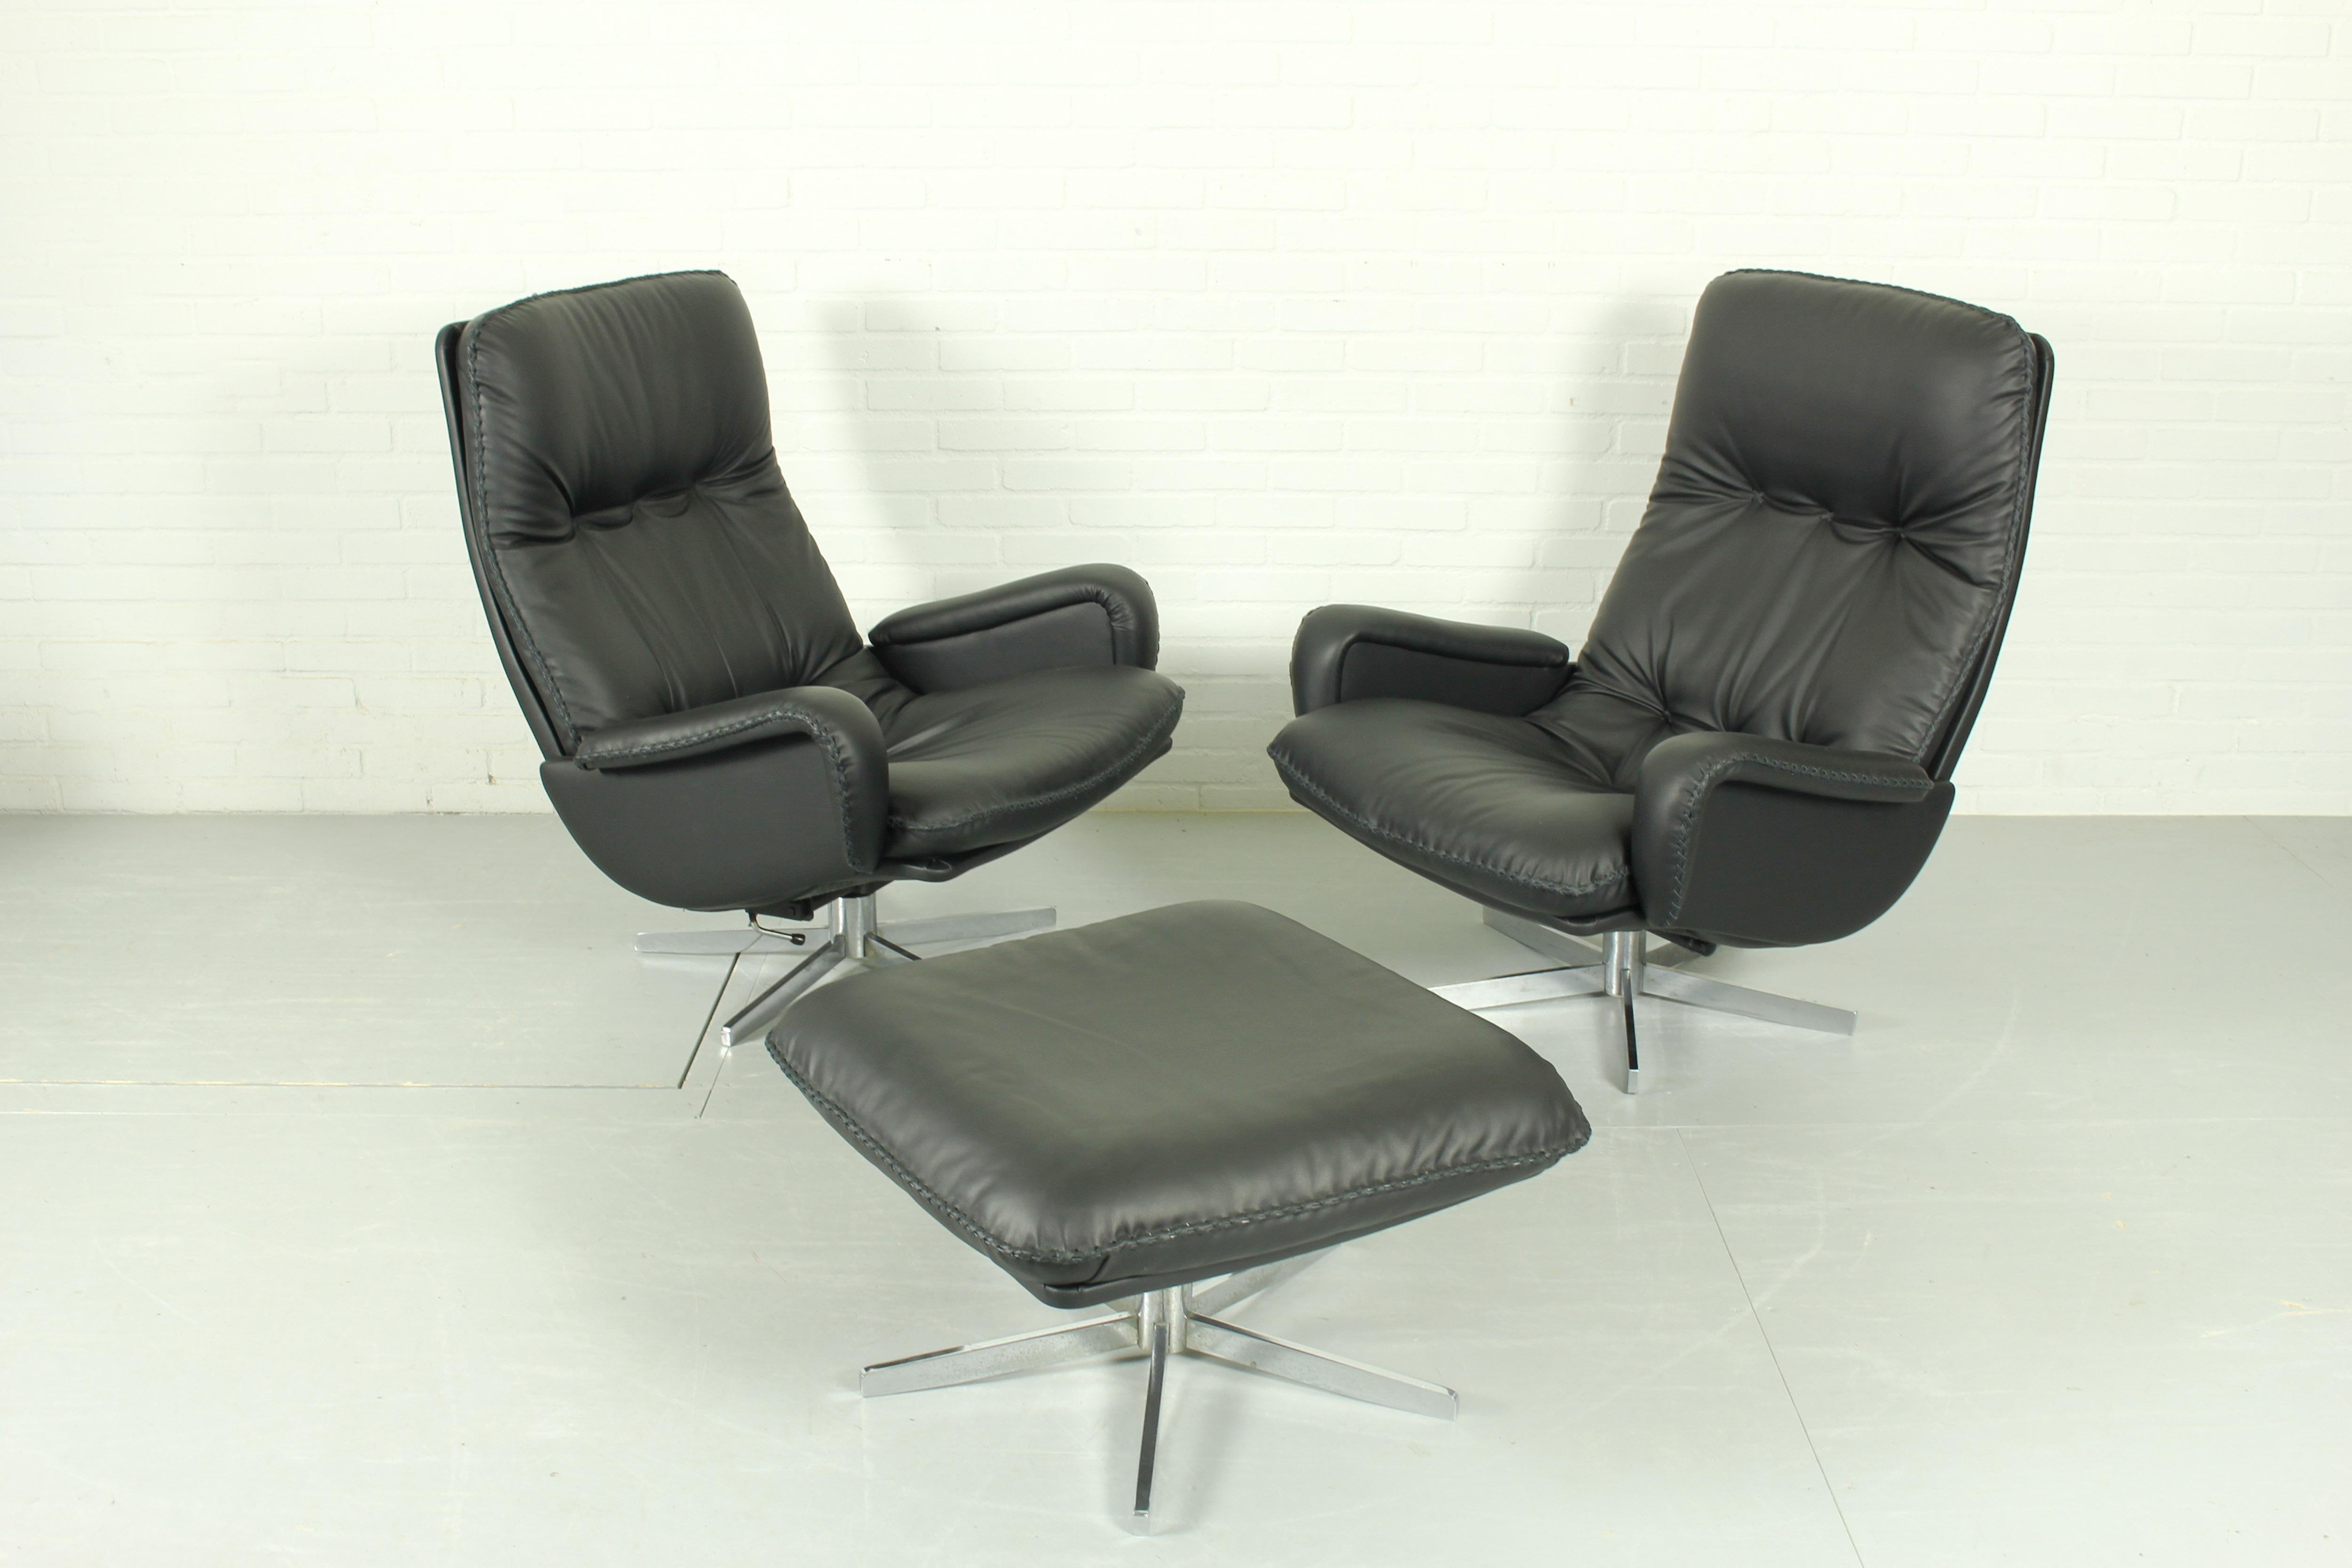 DS231 highback swivel chairs by de Sede Switzerland, 1970. These De Sede swivel lounge chairs are very comfortable and shows incredible craftmanship. In the James Bond film, On Her Majesty’s Secret Service, this chair was used. With new black